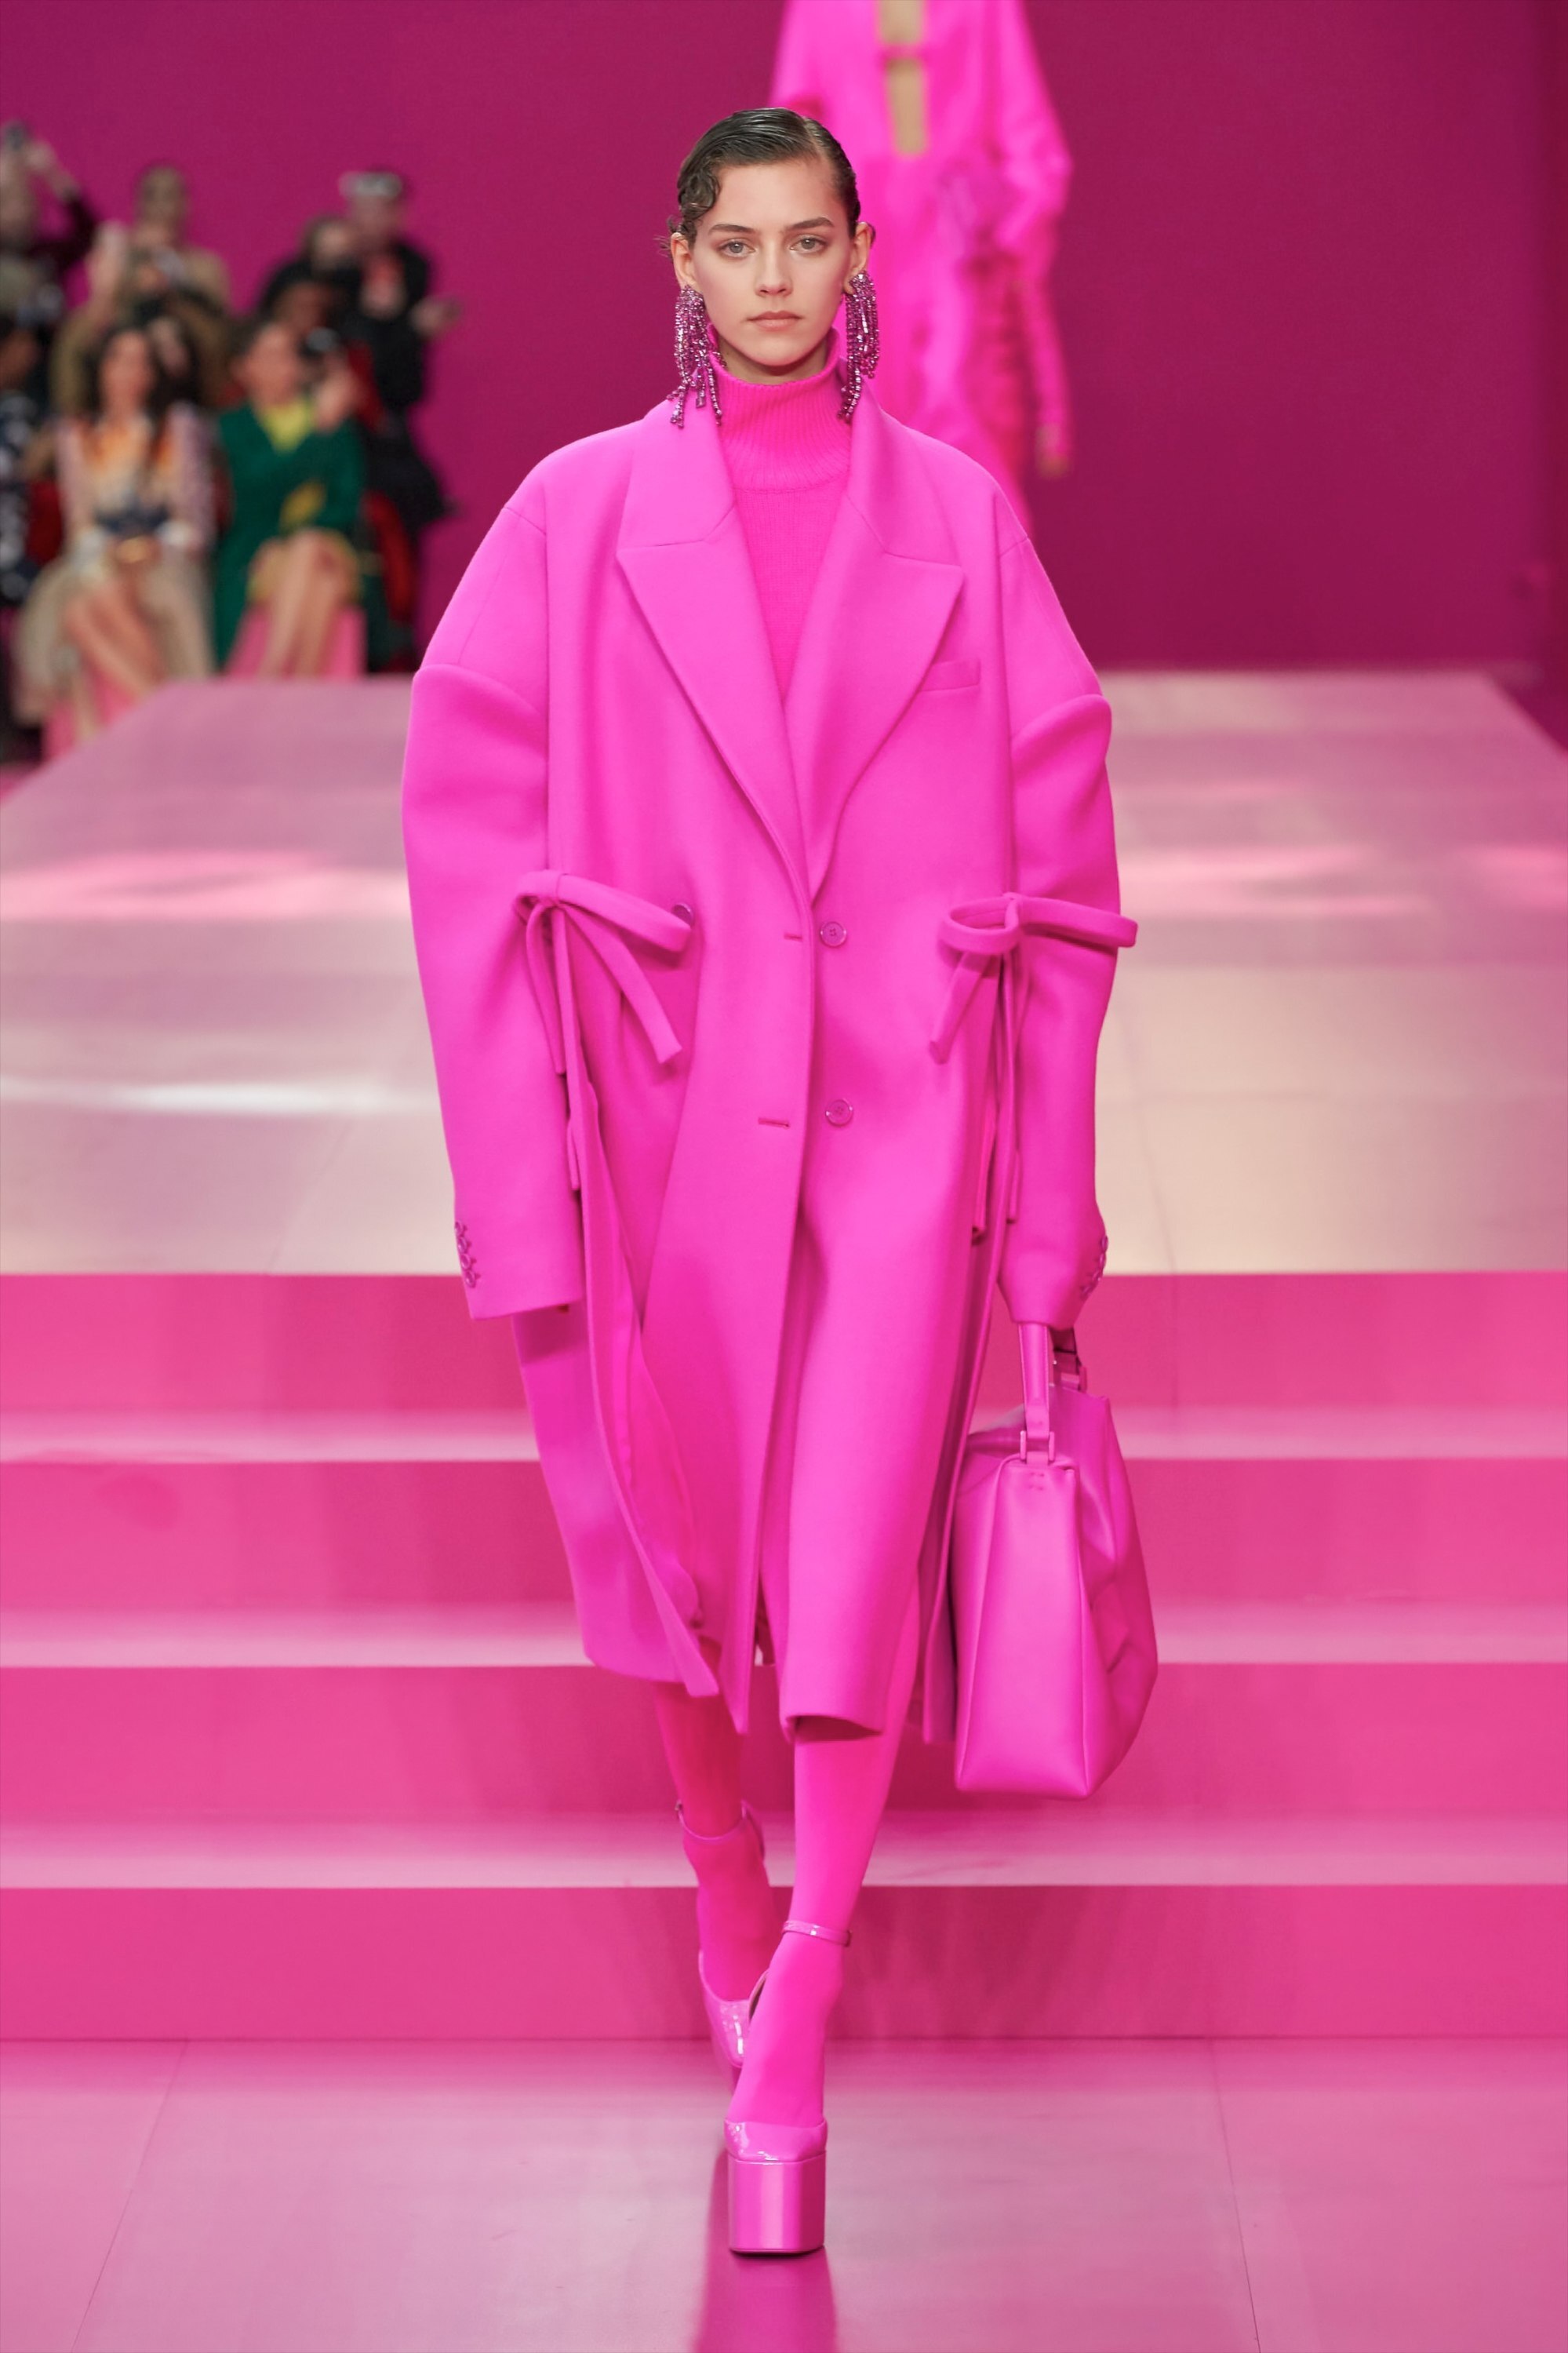 Designer Jonathan Anderson walks on the runway at the Loewe fashion show  during Fall/Winter 2022 Collections Fashion Show at Paris Fashion Week in  Paris, France on March 4 2022. (Photo by Jonas